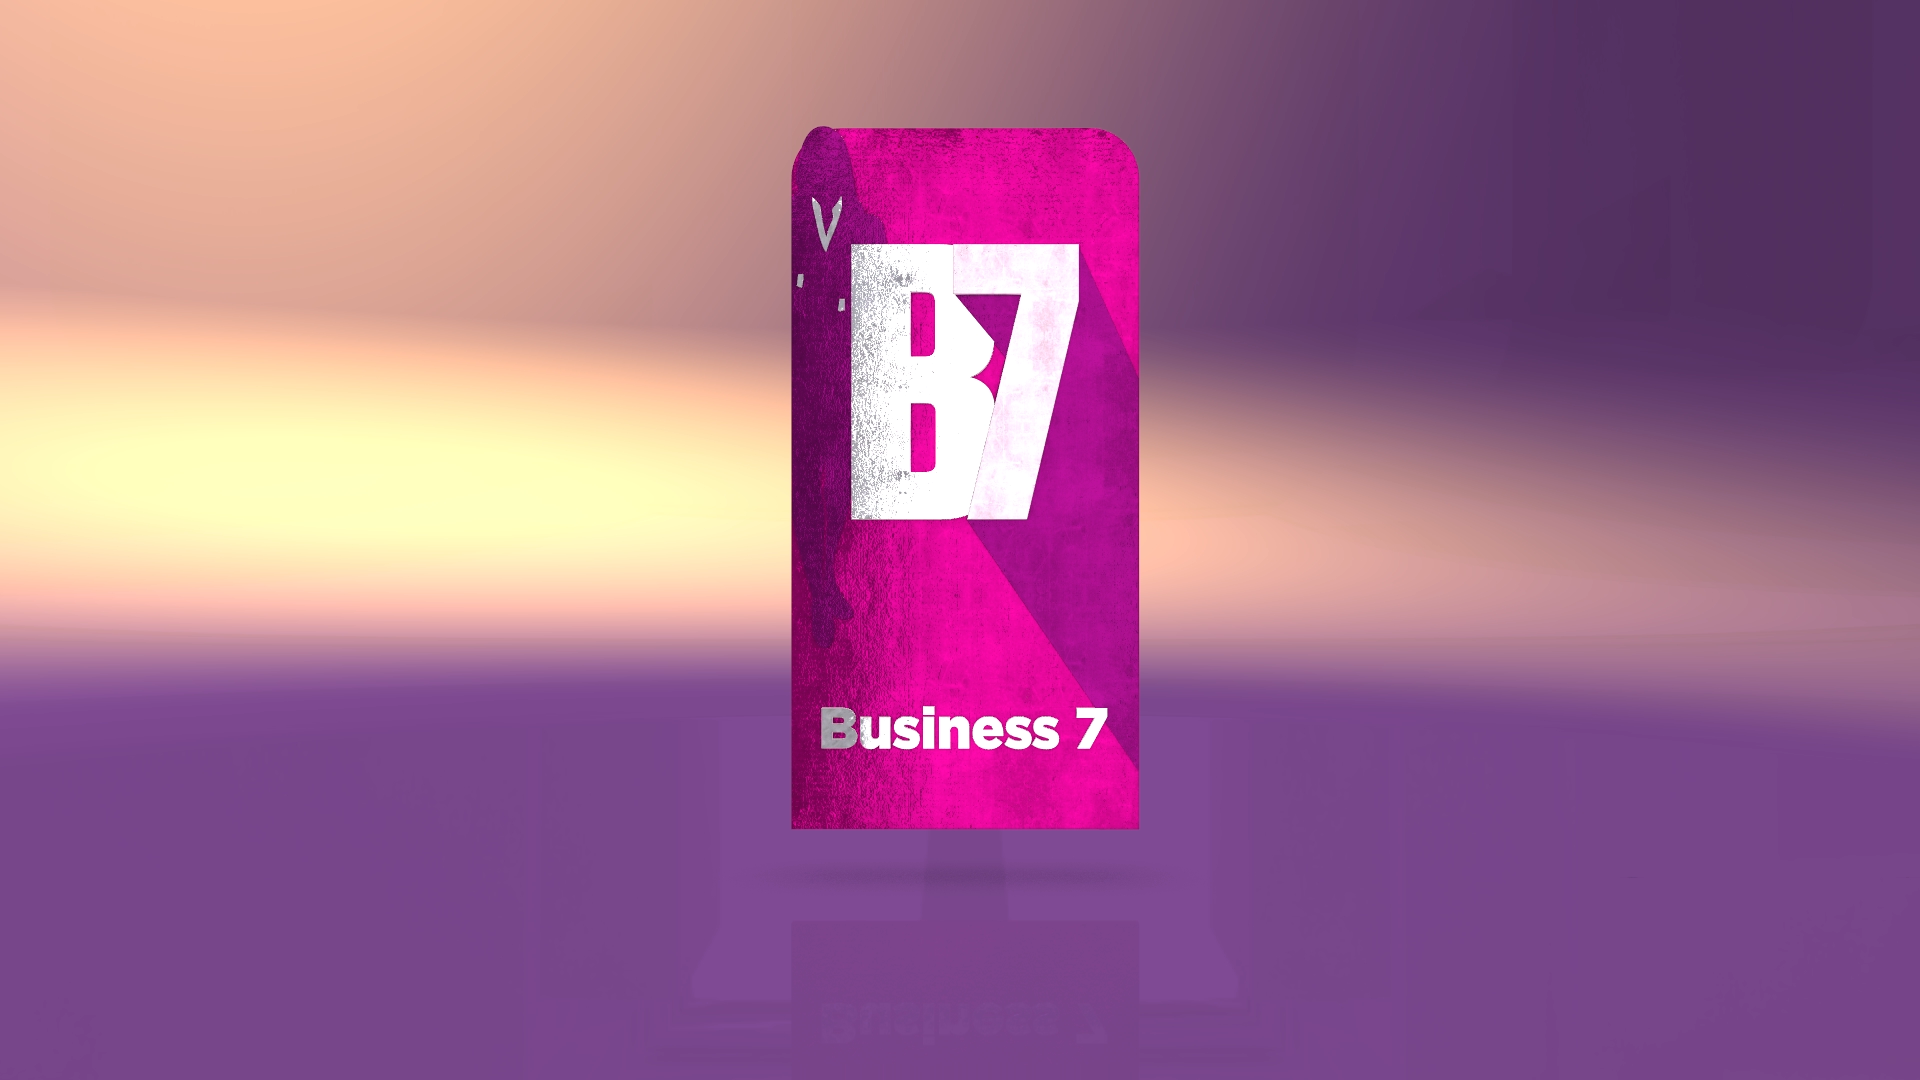 Business 7 - 6 October 2021